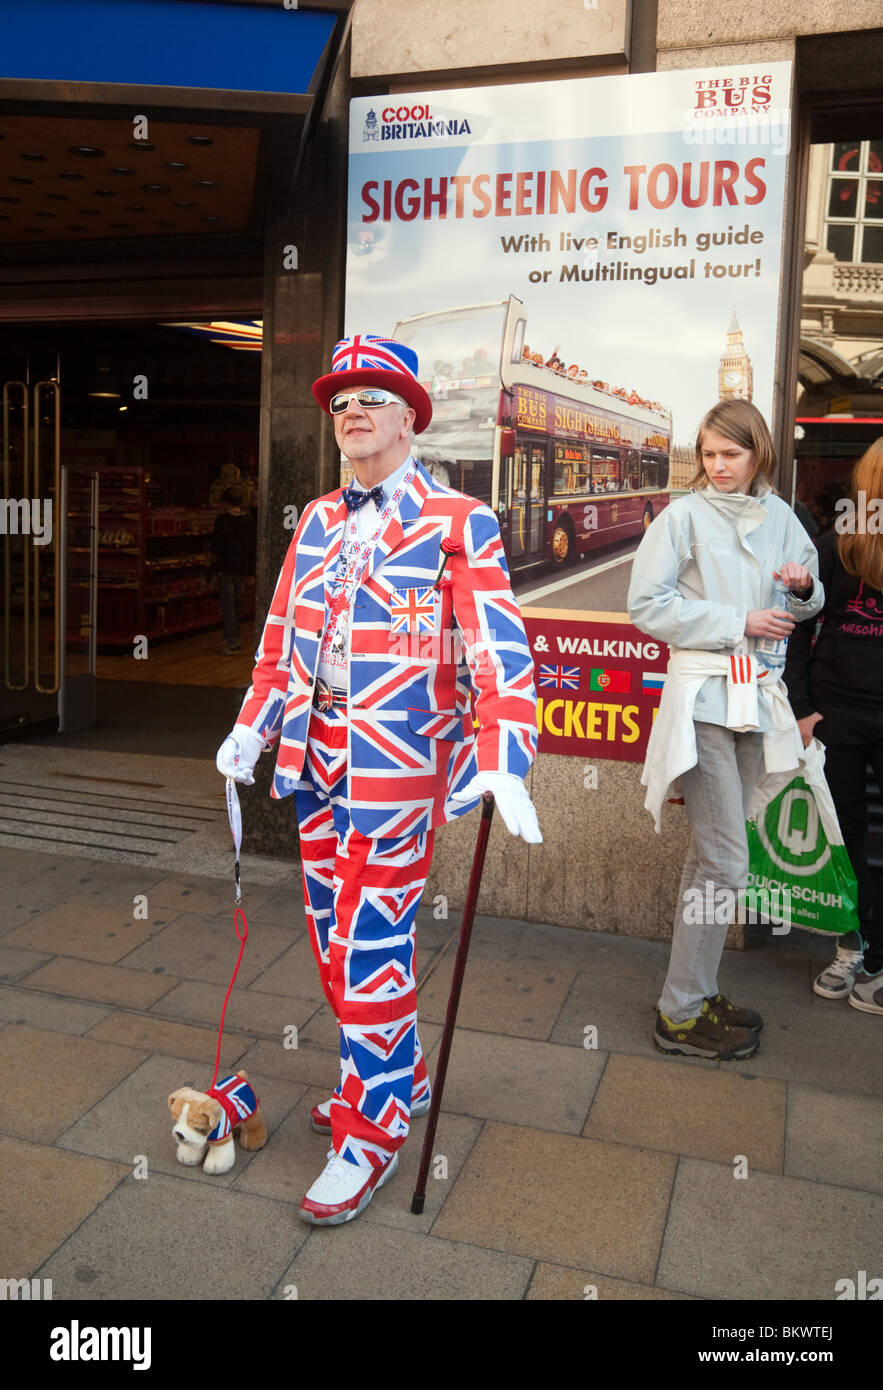 A man in a Union Jack outfit advertising for London bus tours, Piccadilly  Circus, London UK Stock Photo - Alamy